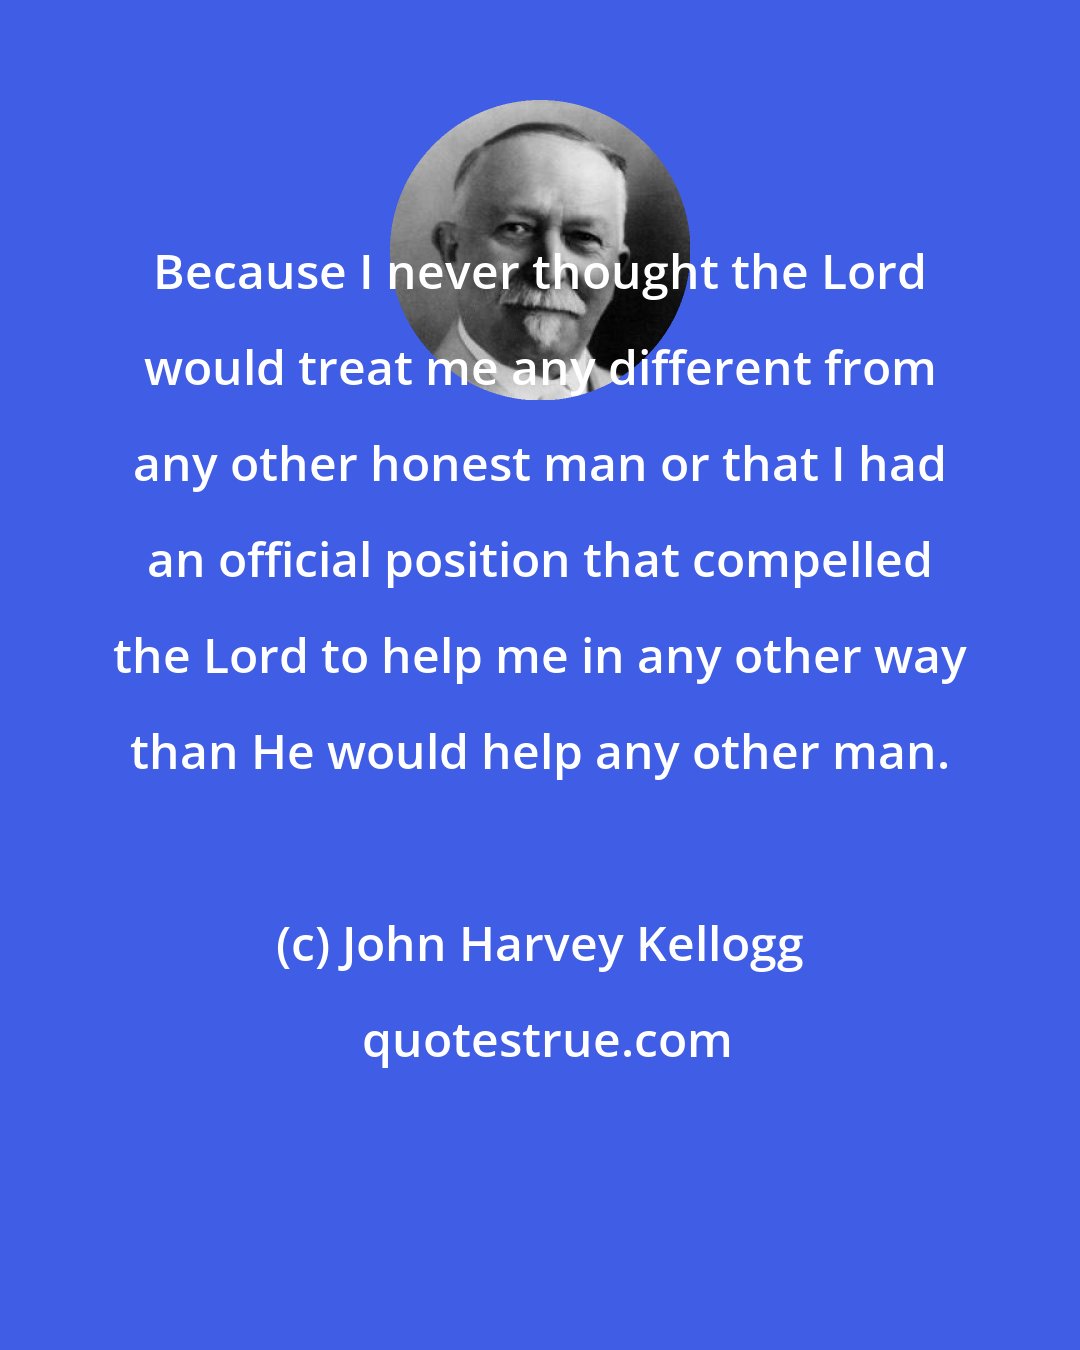 John Harvey Kellogg: Because I never thought the Lord would treat me any different from any other honest man or that I had an official position that compelled the Lord to help me in any other way than He would help any other man.